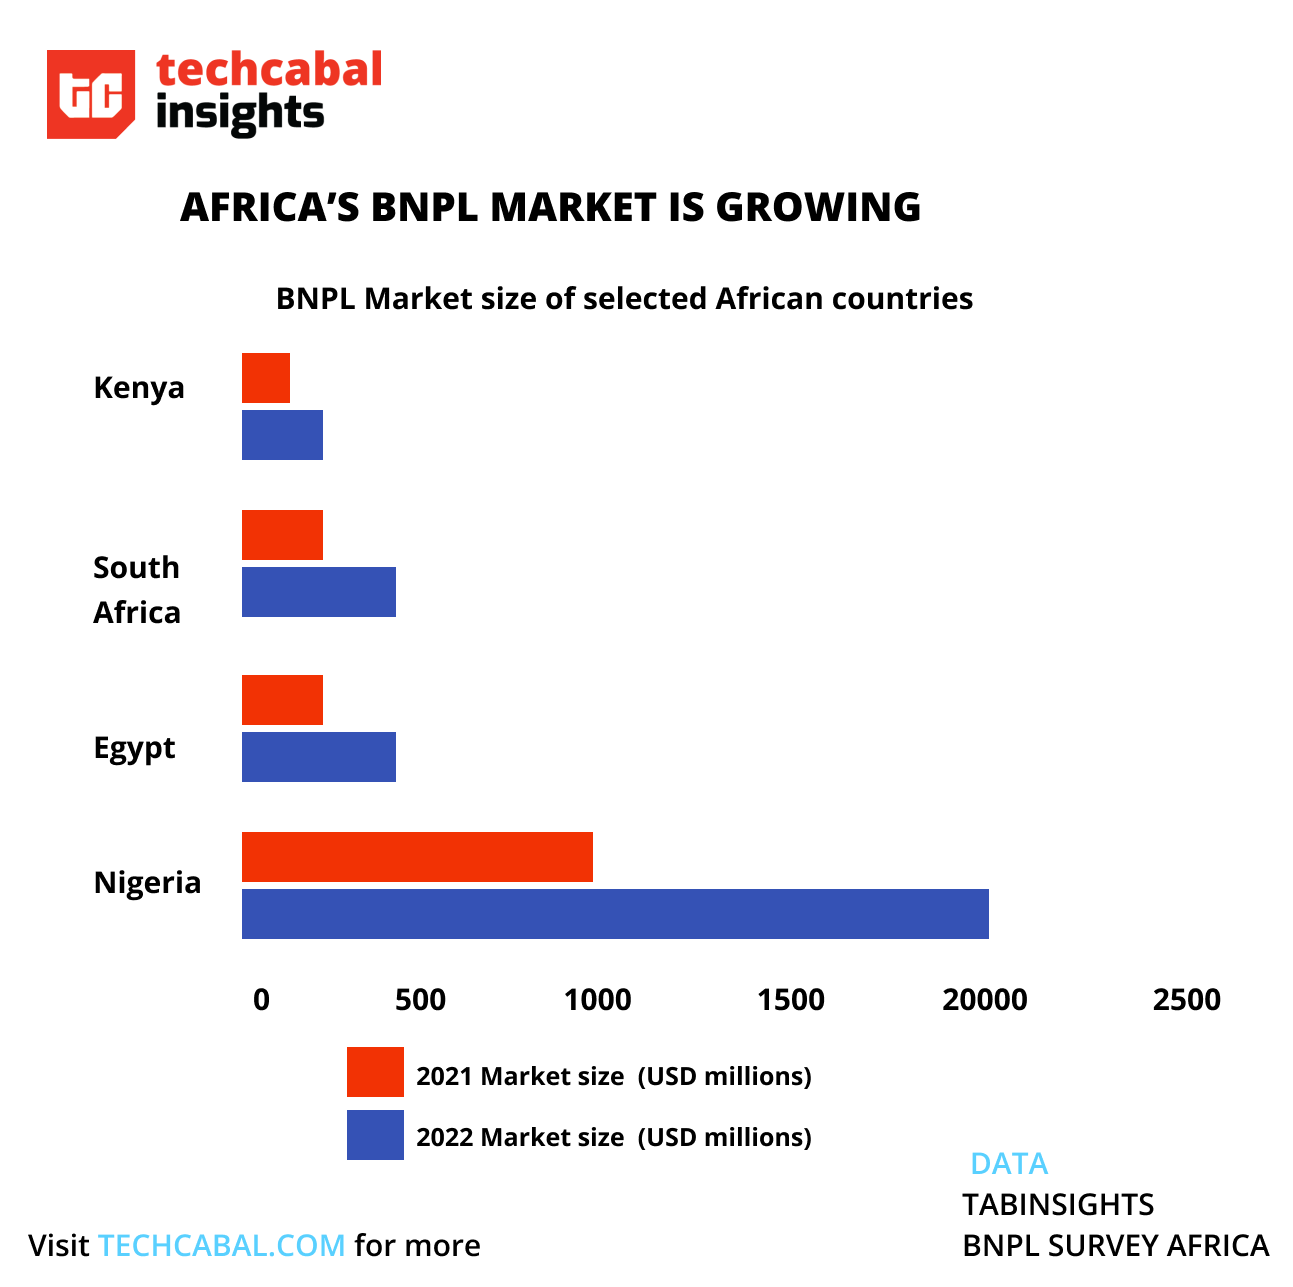 Chart showing BNPL market size of selected AFrican countries in 2021 and 2022